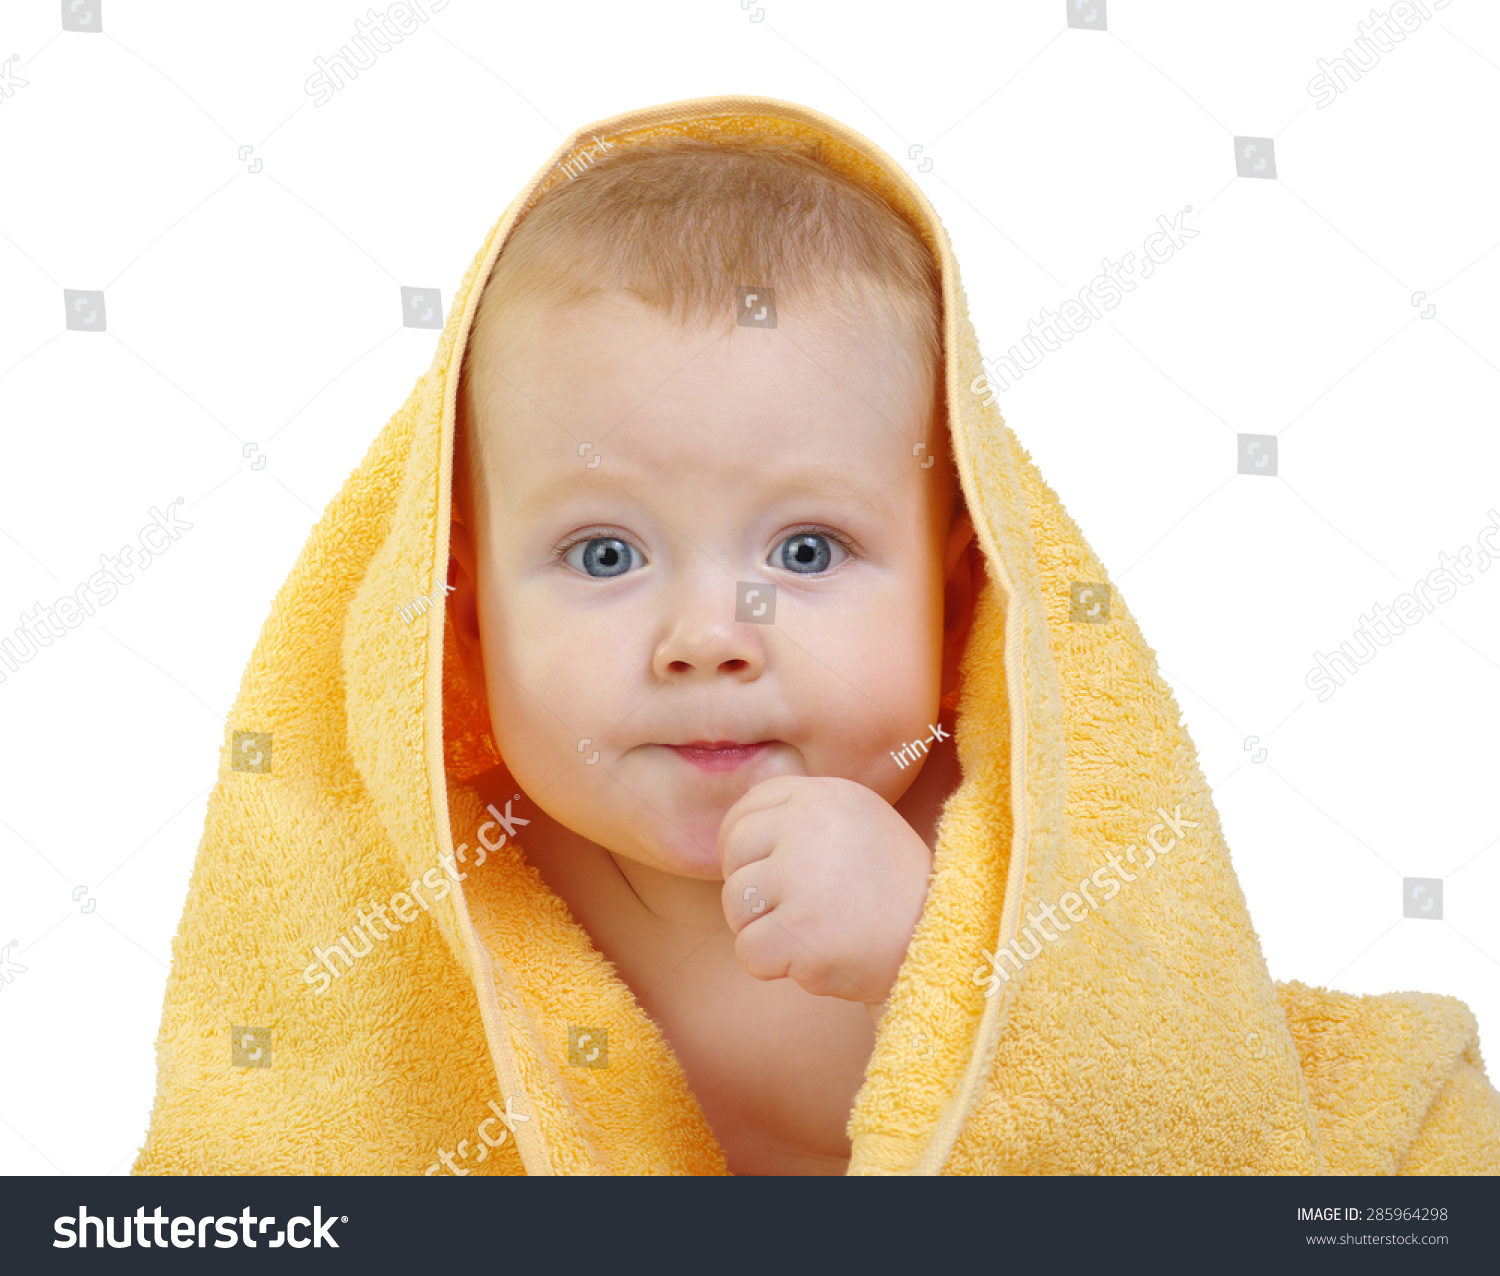 Baby In Towel On White Background Stock Photo 285964298 : Shutterstock